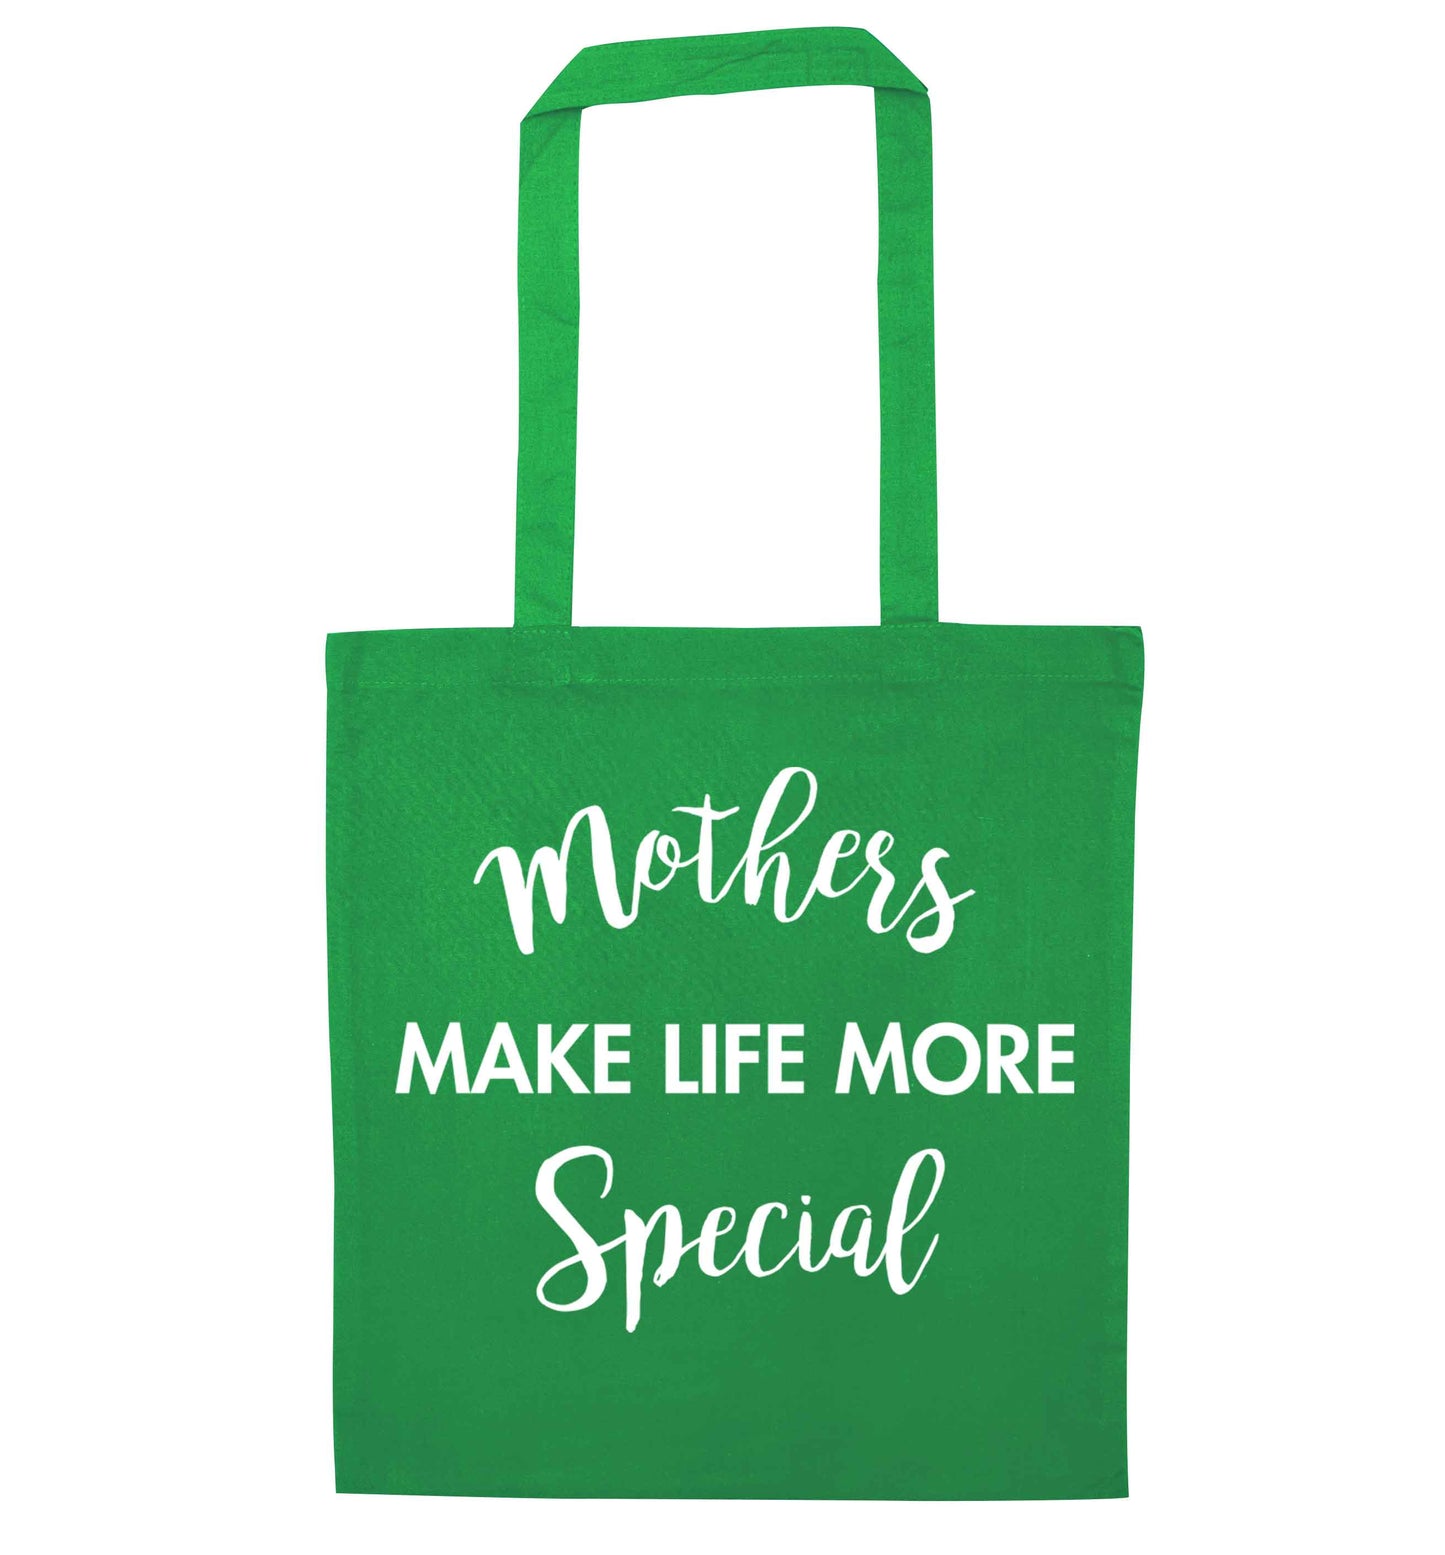 Mother's make life more special green tote bag